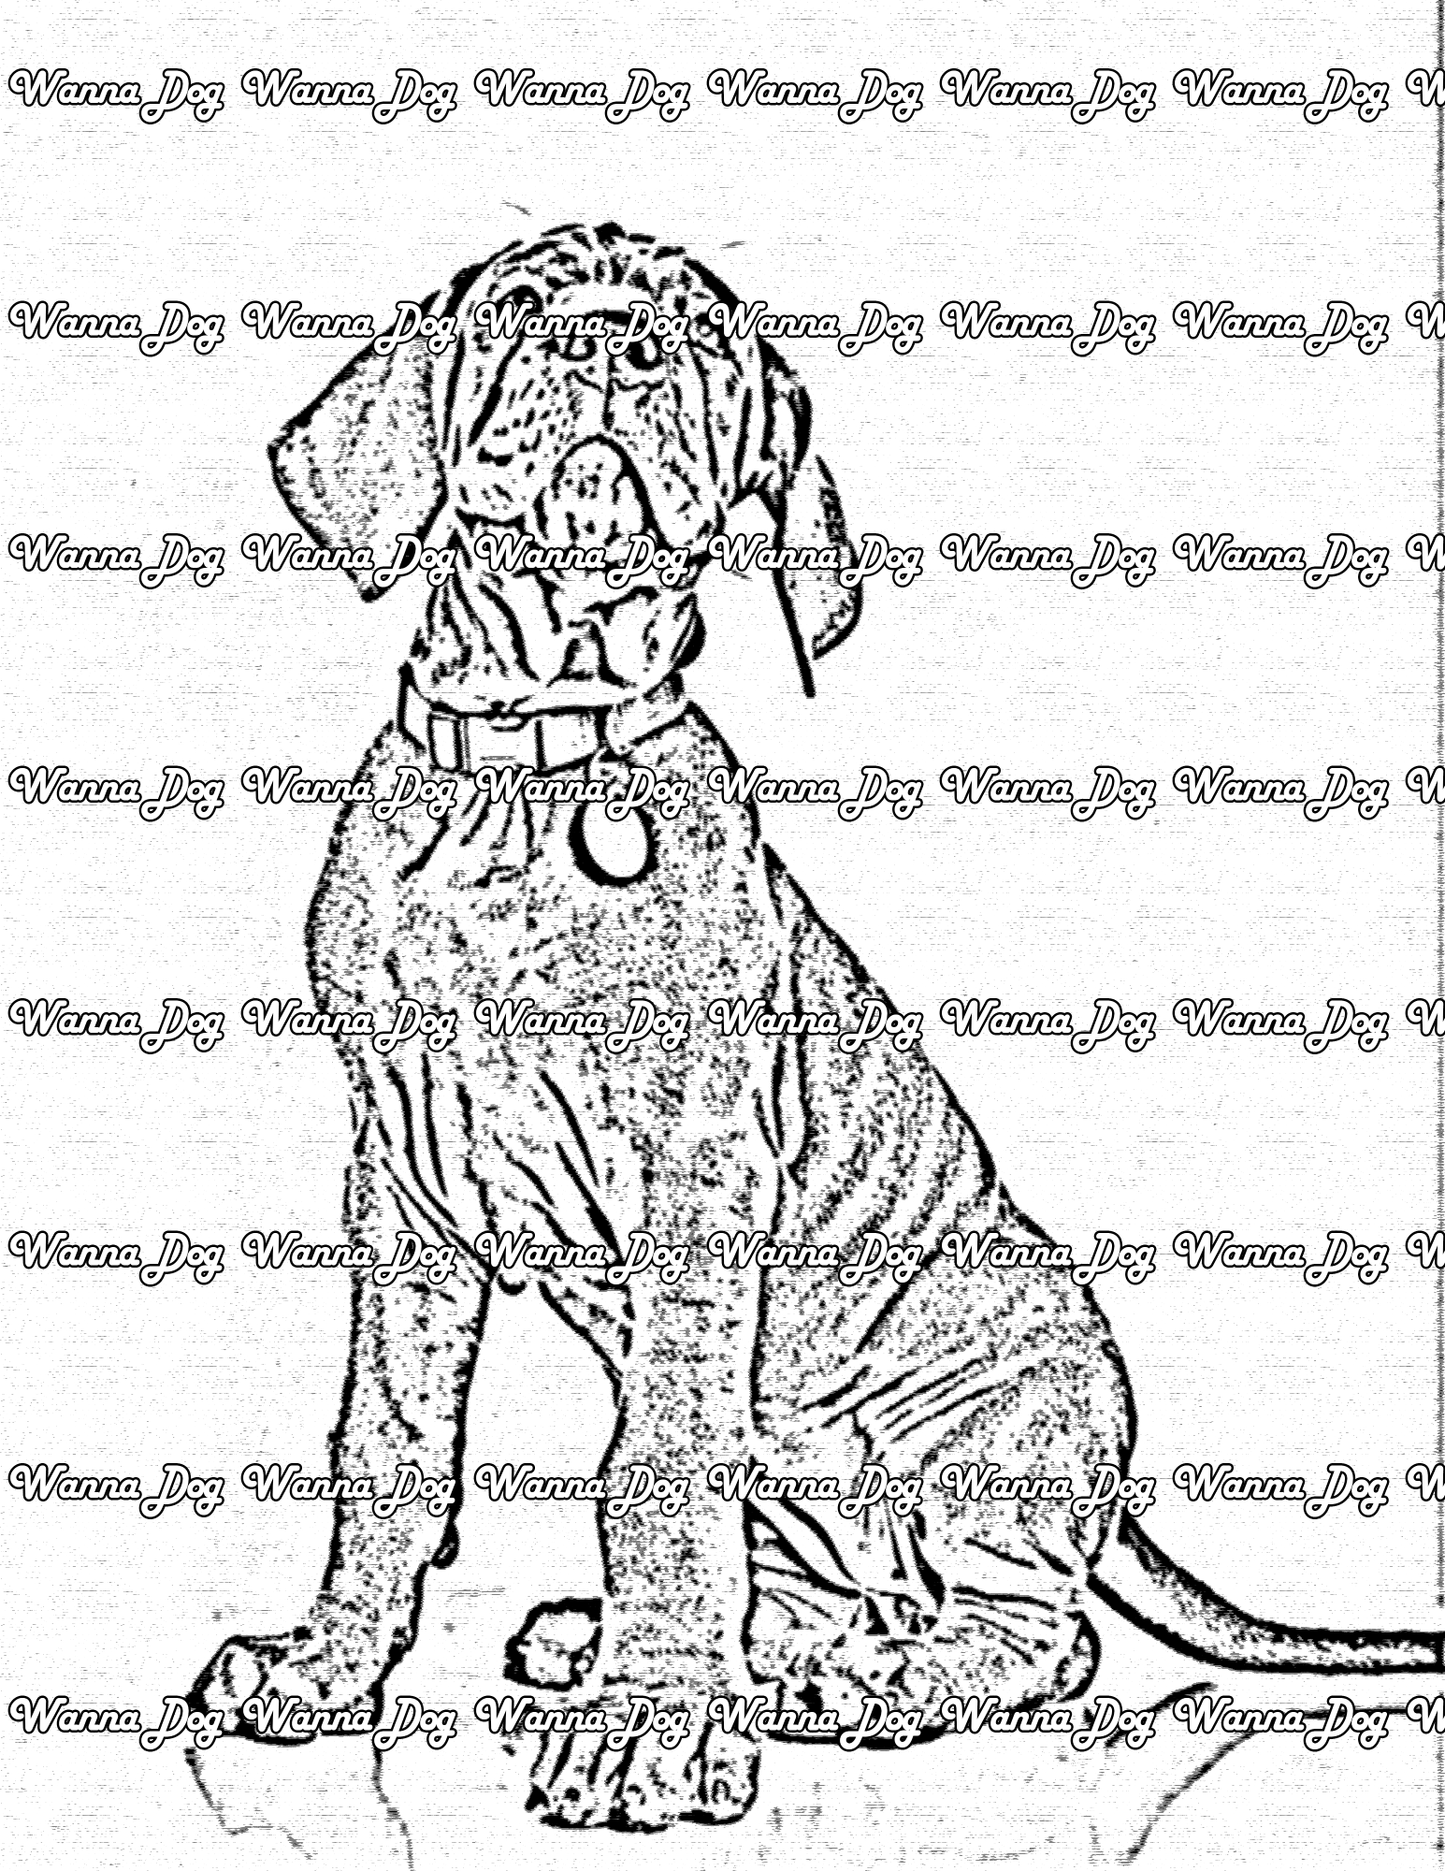 Great Dane Coloring Page of a Great Dane sitting down and posing